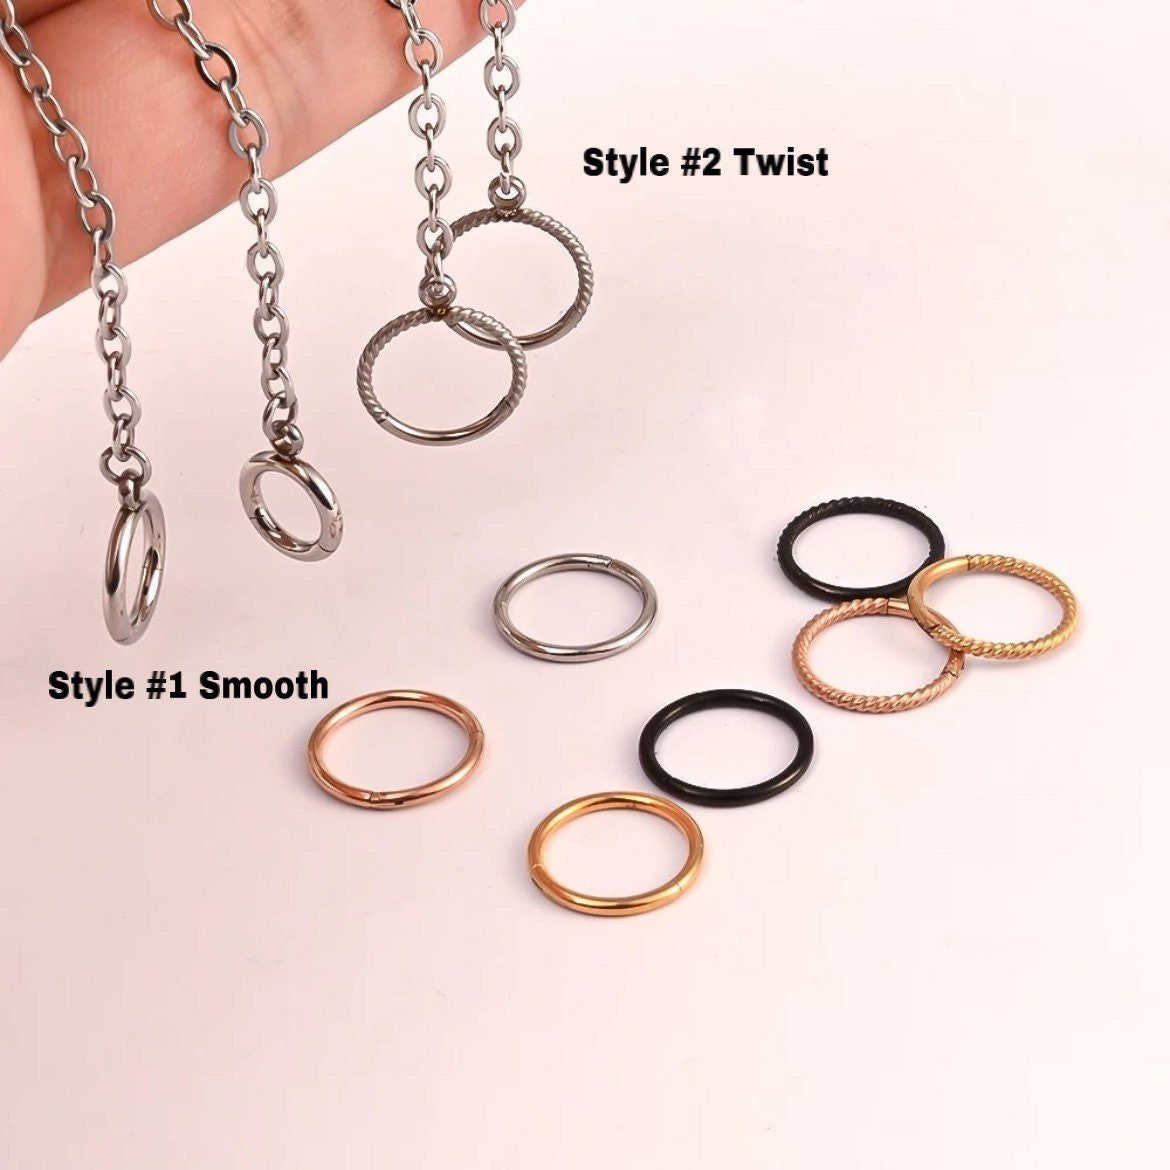 Chain Ring Stack For Stretched Ears - DustyJewelz